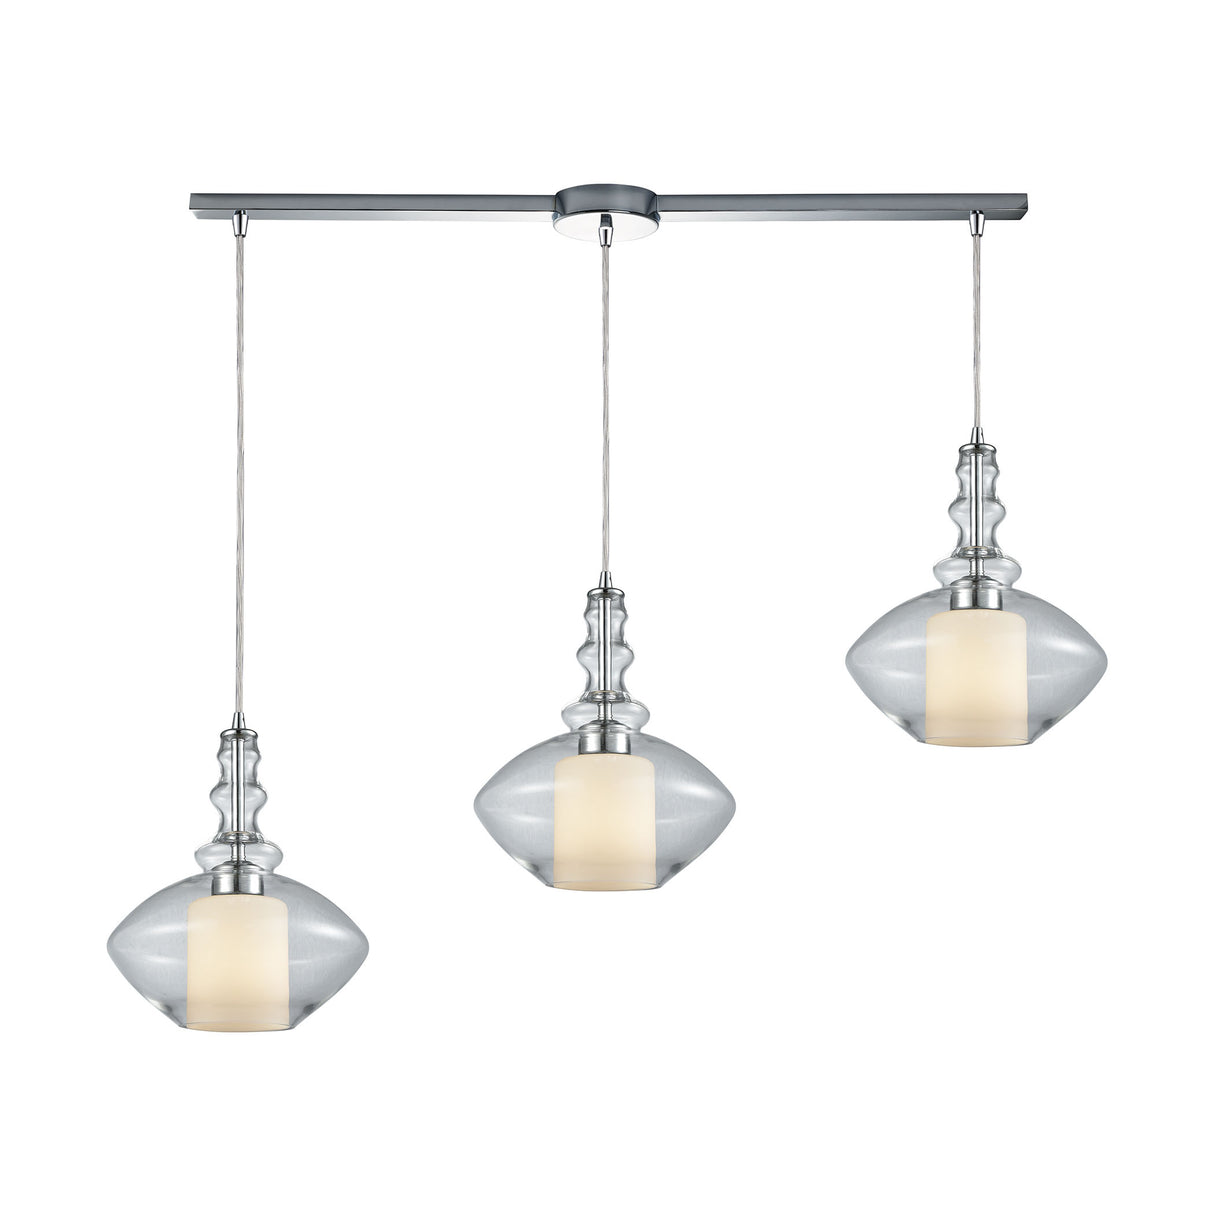 Elk 56500/3L Alora 3-Light Linear Mini Pendant Fixture in Chrome with Clear and Opal White Glass